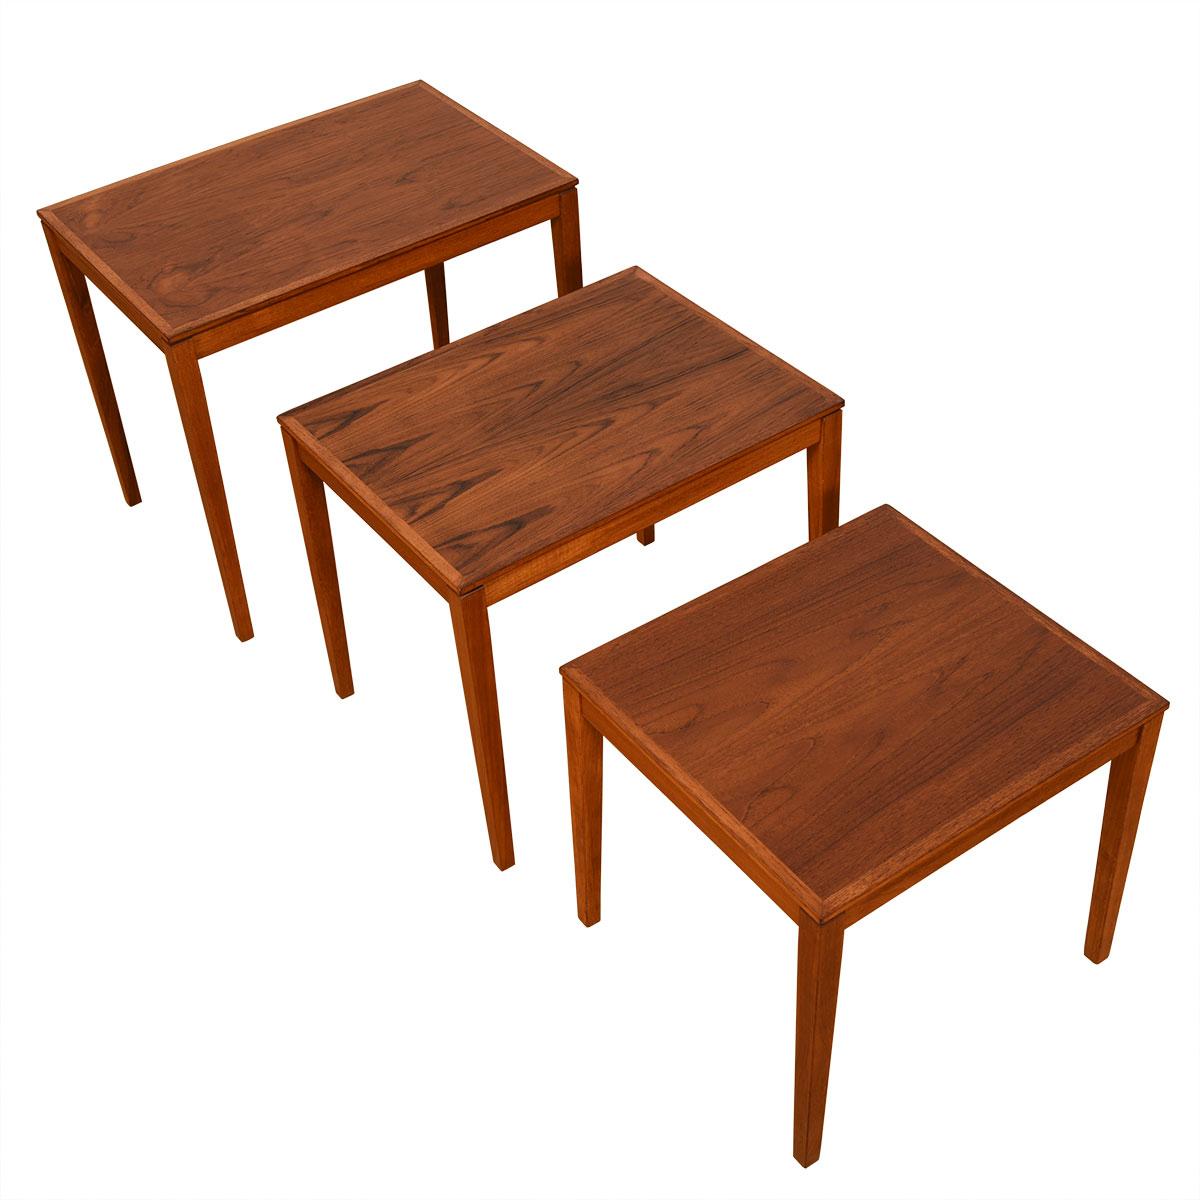 Set of 3 Danish Modern Teak Nesting Tables

Additional information:
Material: Teak
Featured at DC:
Set of 3 graduated nesting tables in teak.
Each has lighter edge band defining table surface.
Lovely old teak patina.

Dimension: W 23.75? x